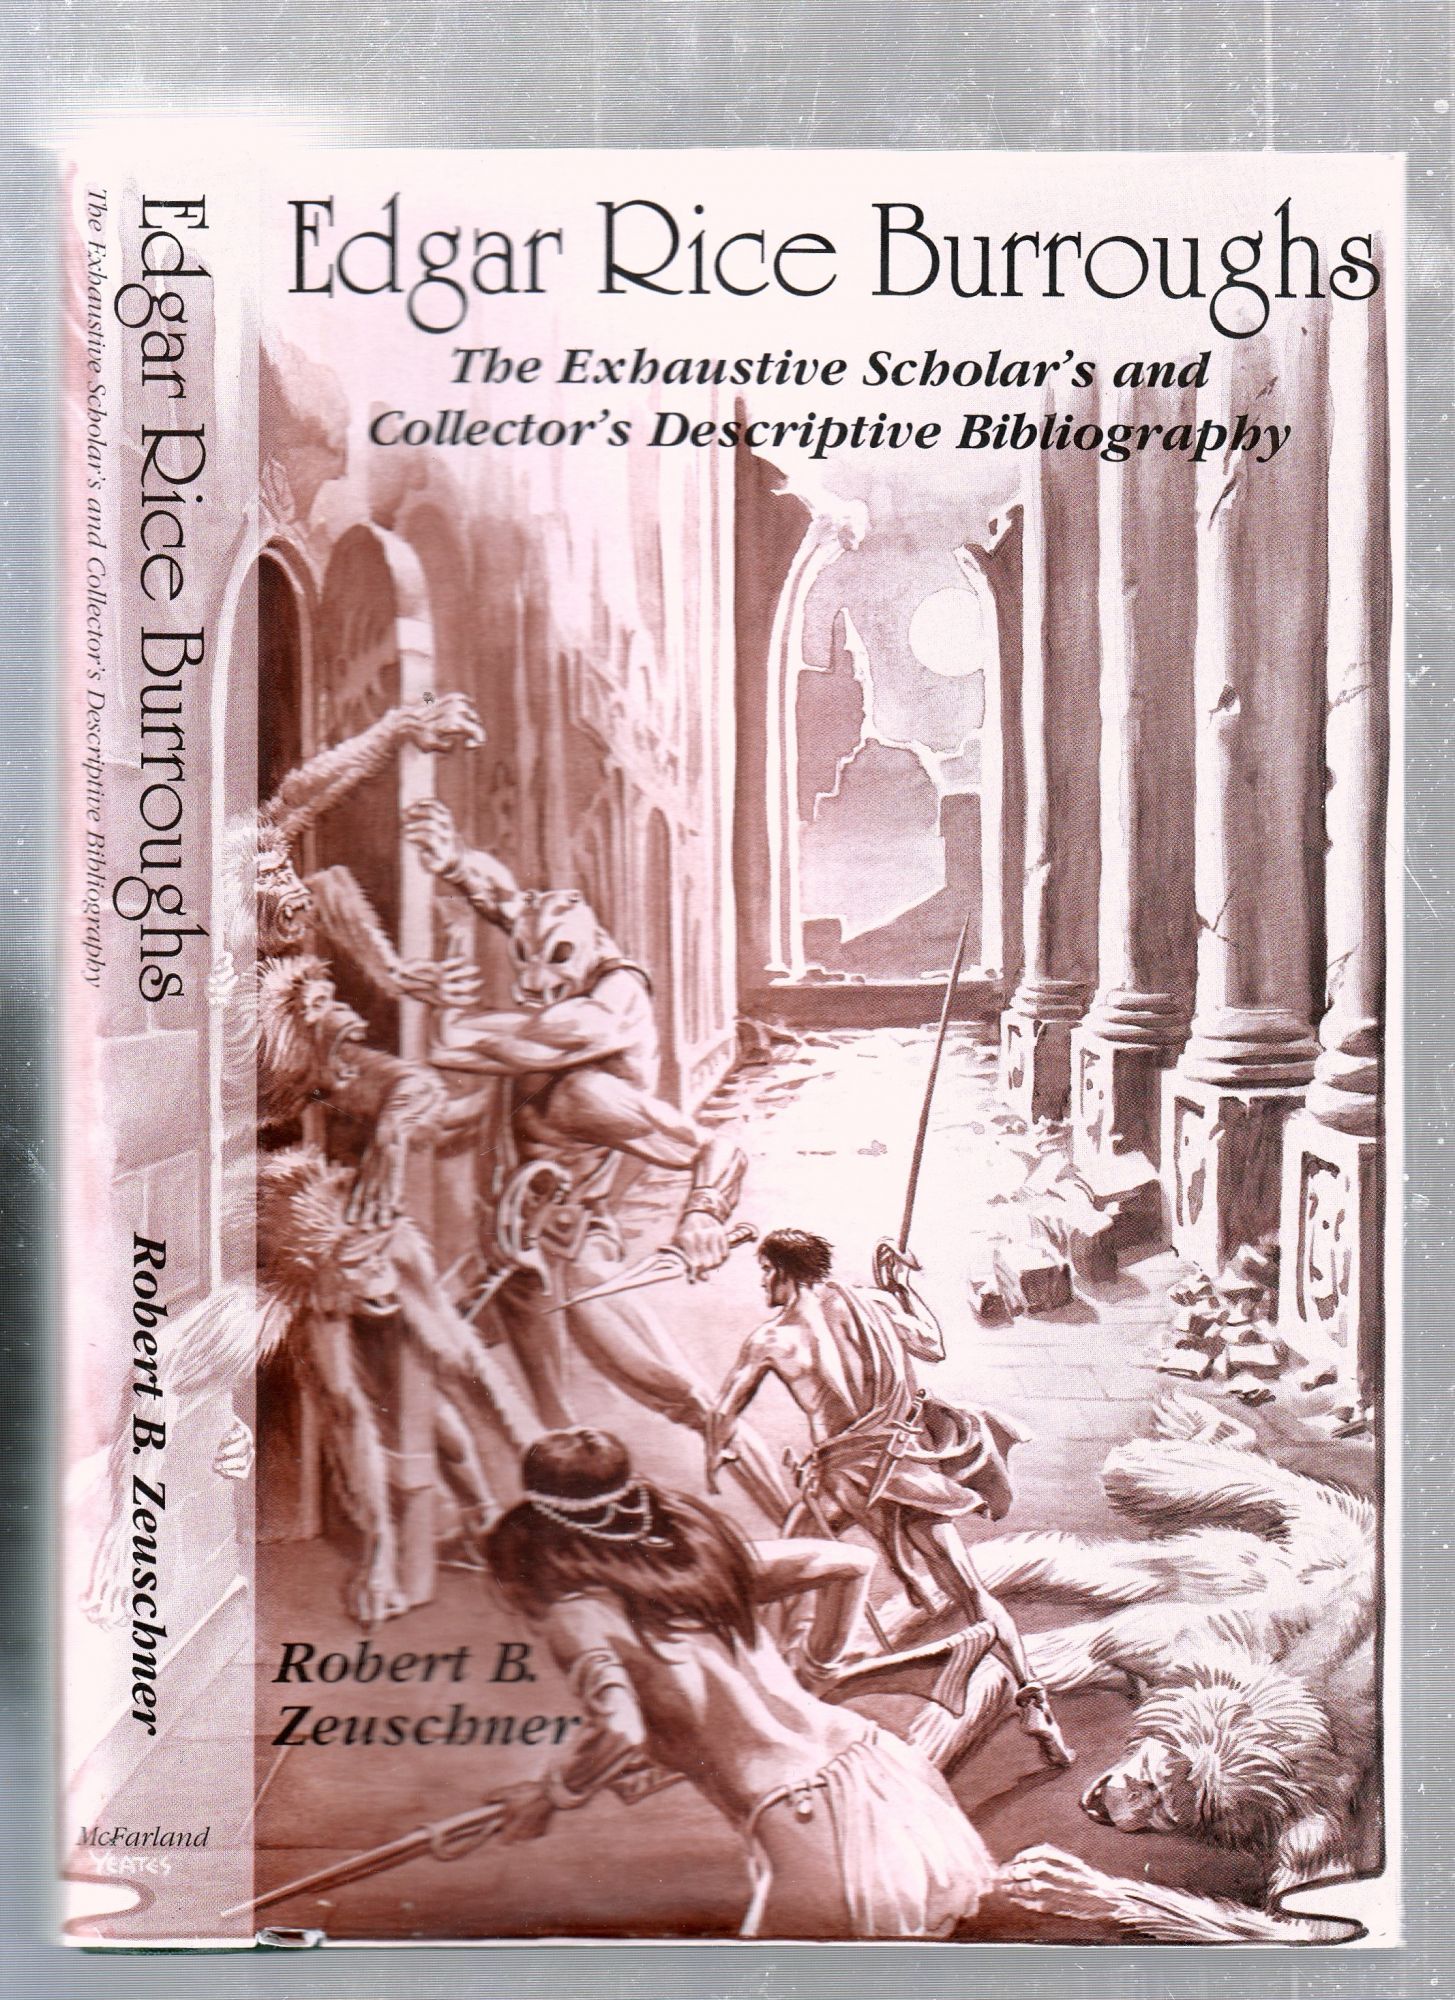 Edgar Rice Burroughs: The Exhaustive Scholar's and Collector's Descriptive Bibliography (Special Autographed Edition) - Robert B. Zeuschner